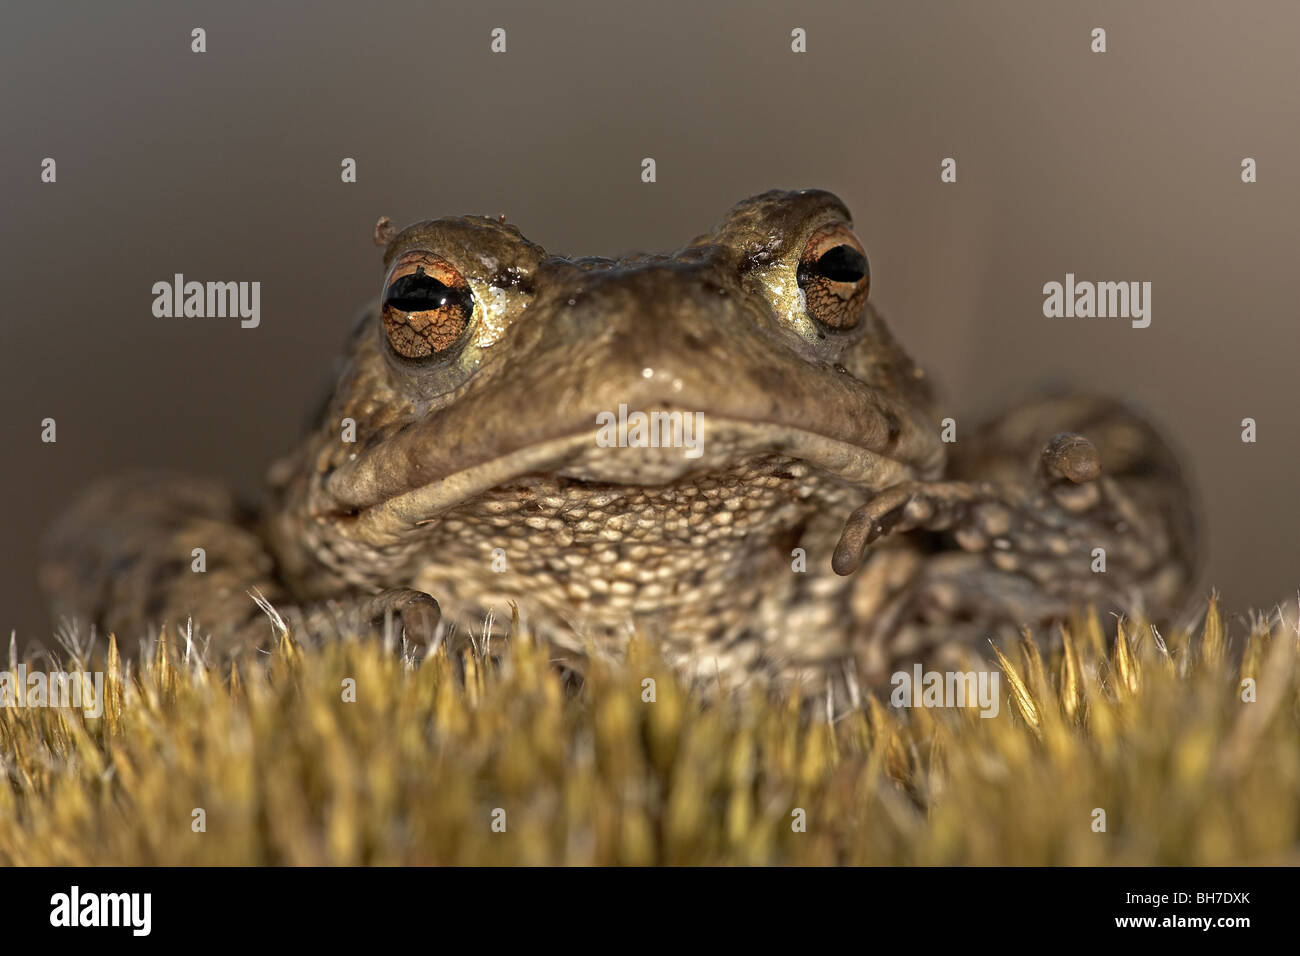 Common toad, Bufo bufo on way to breeding pond, Allerthorpe Common, East Yorkshire, UK Stock Photo